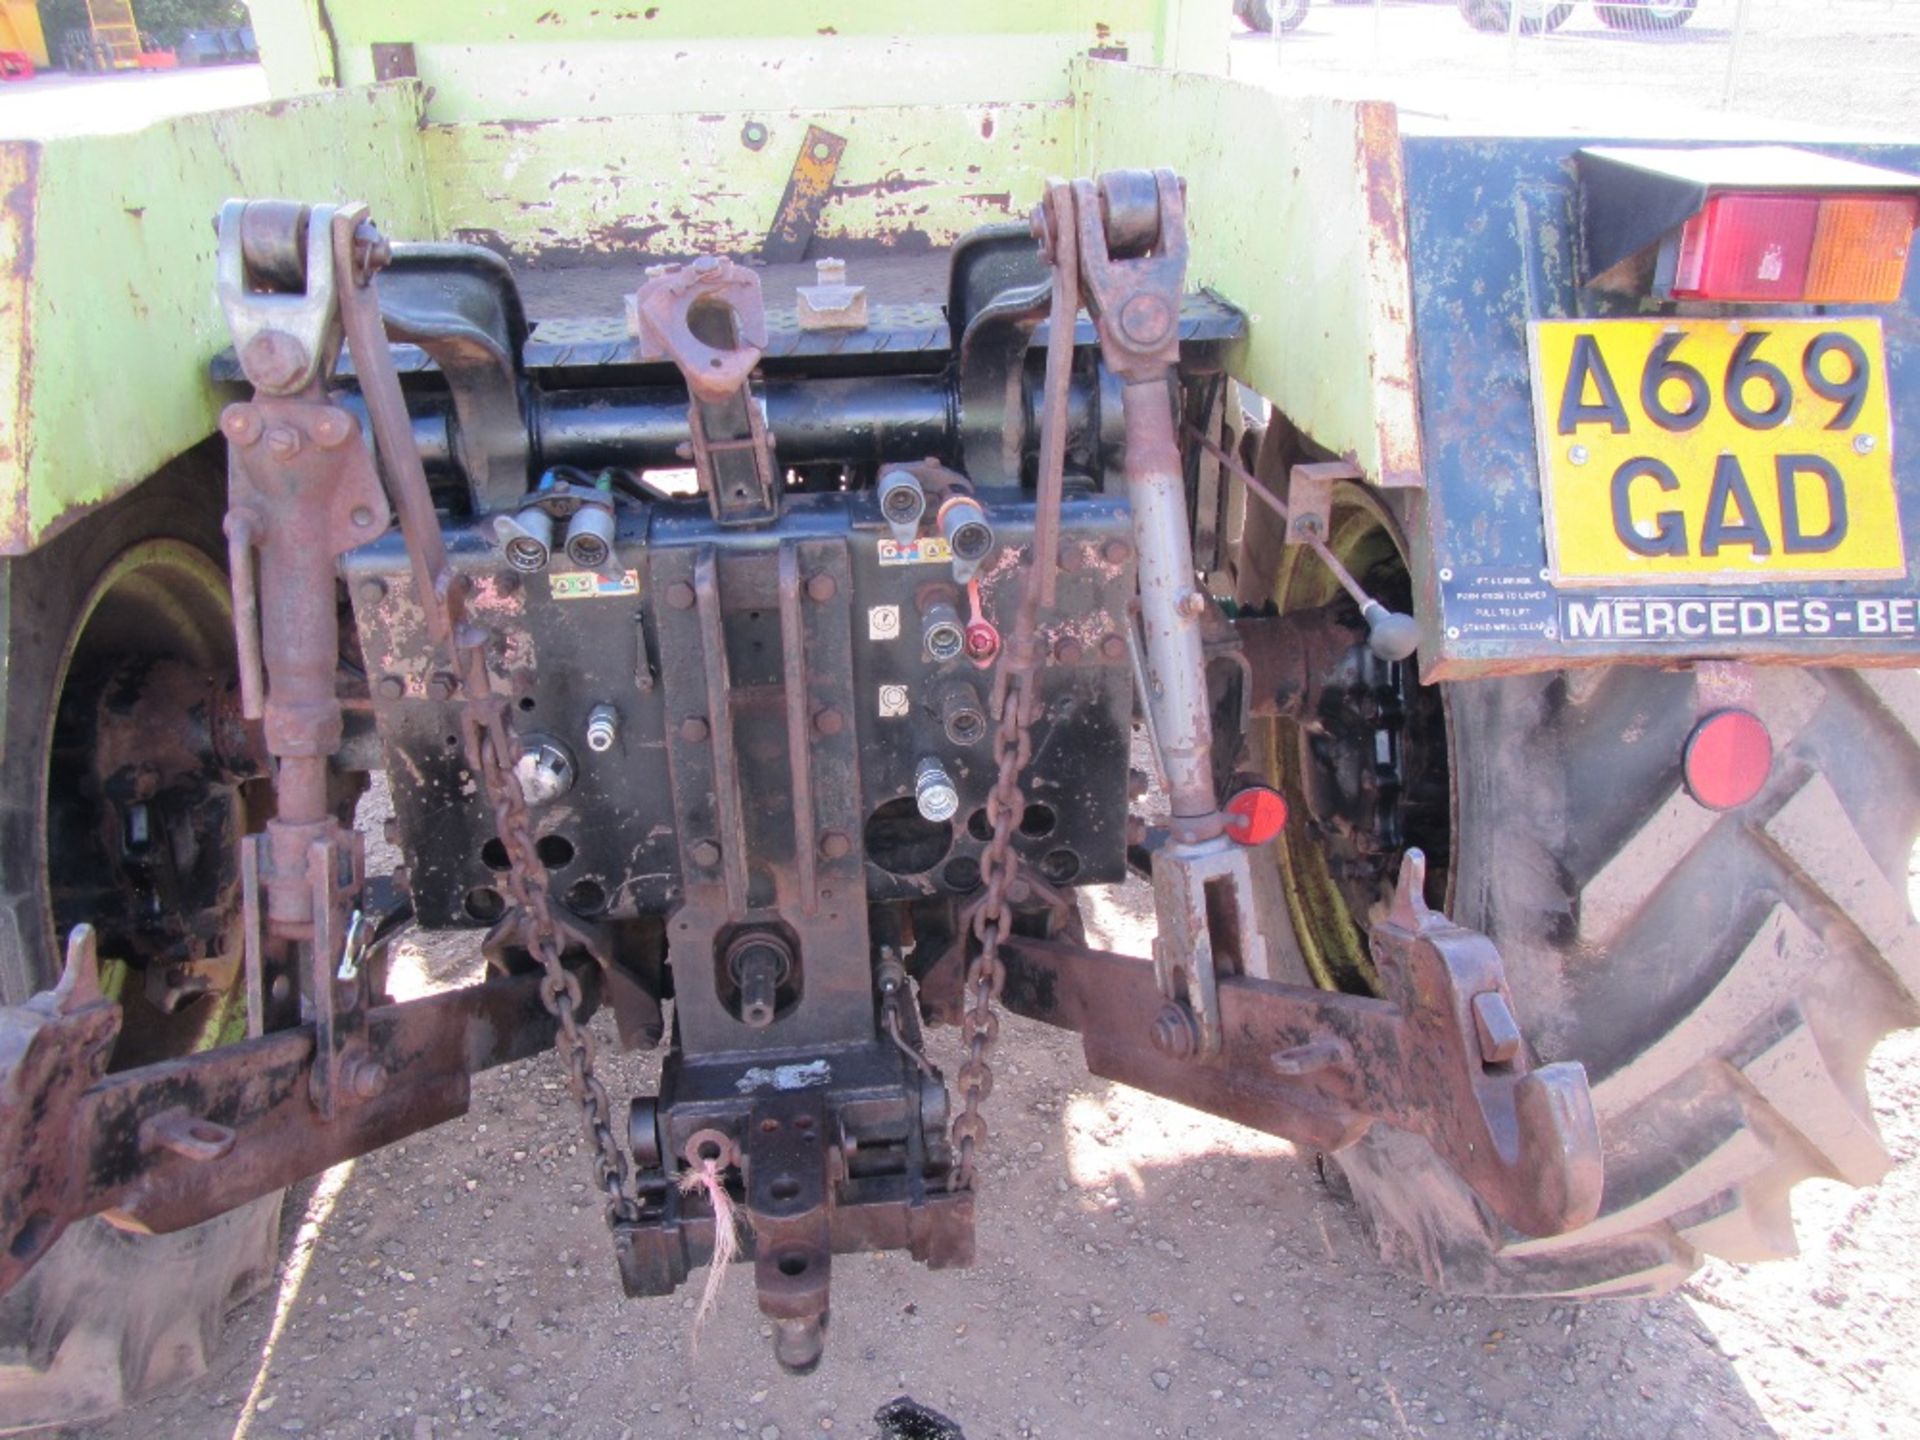 MB Trac 1000 with Cummins Engine, PTO Linkage, PUH, 16.9-26 Tyres Reg. No. A669 GAD Ser No - Image 7 of 16